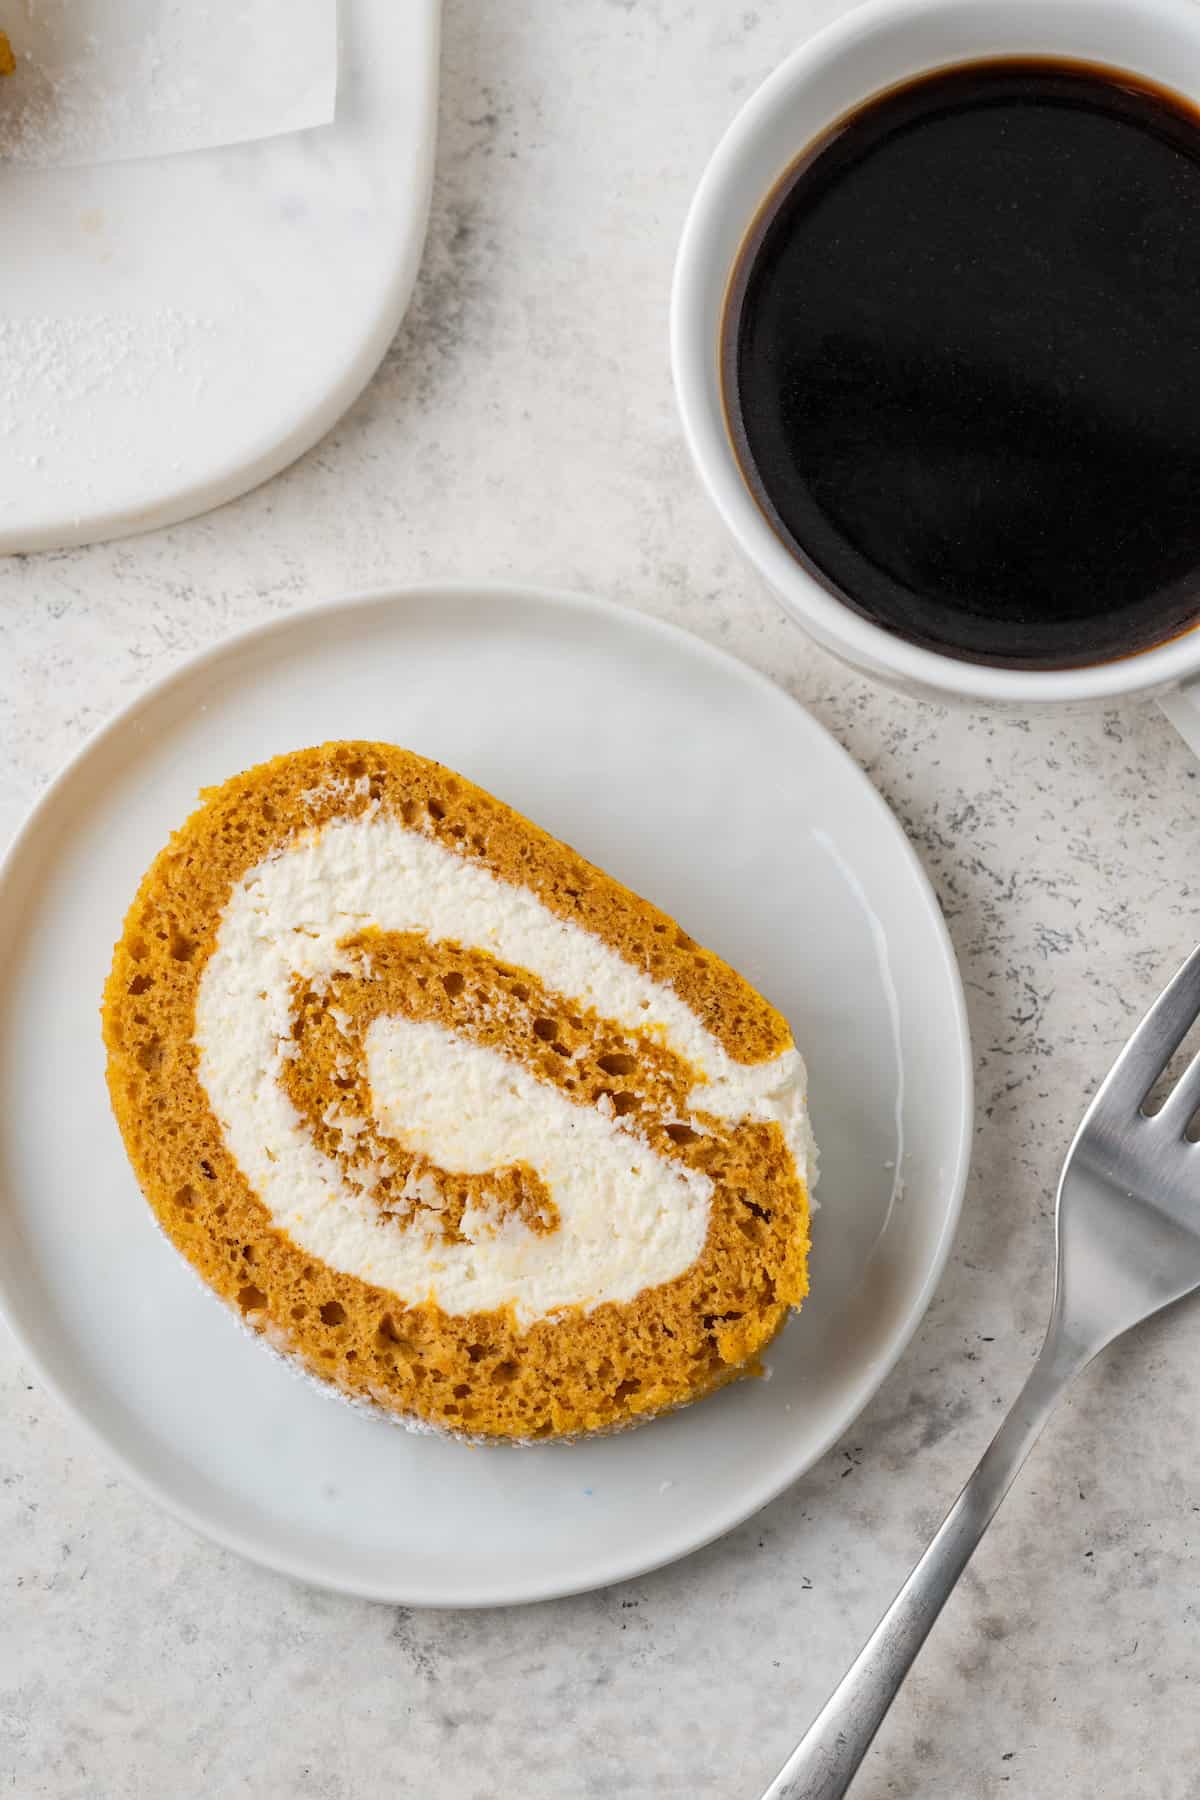 A slice of pumpkin roll on a white plate with a cup of coffee.